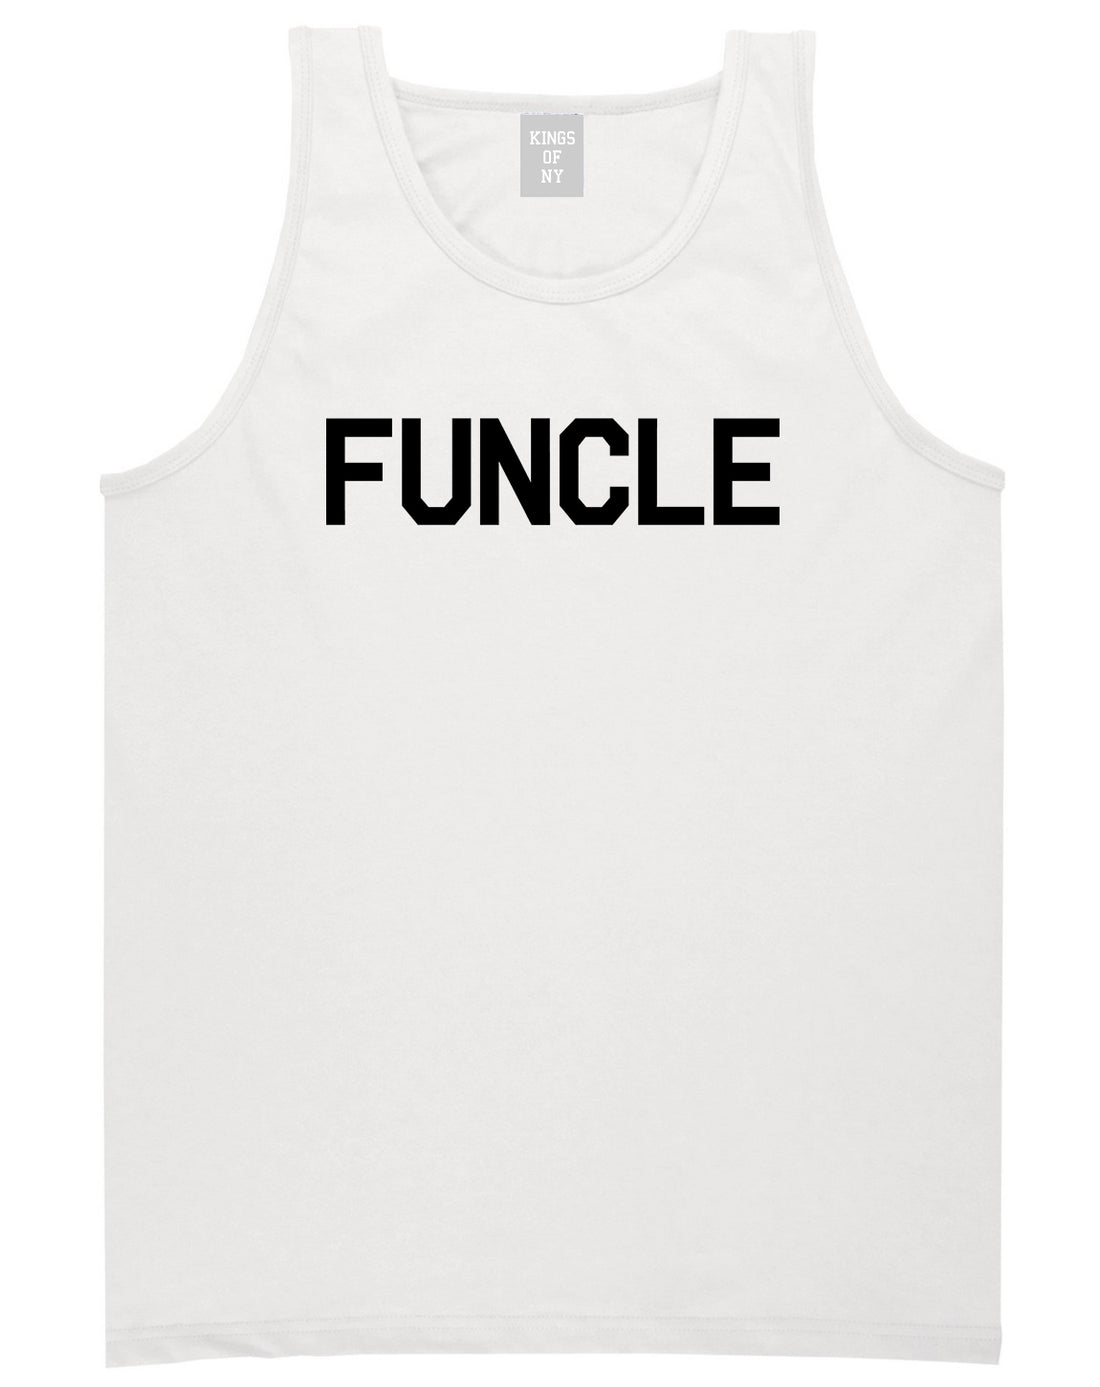 Funcle Fun Funny Uncle Mens Tank Top T-Shirt White